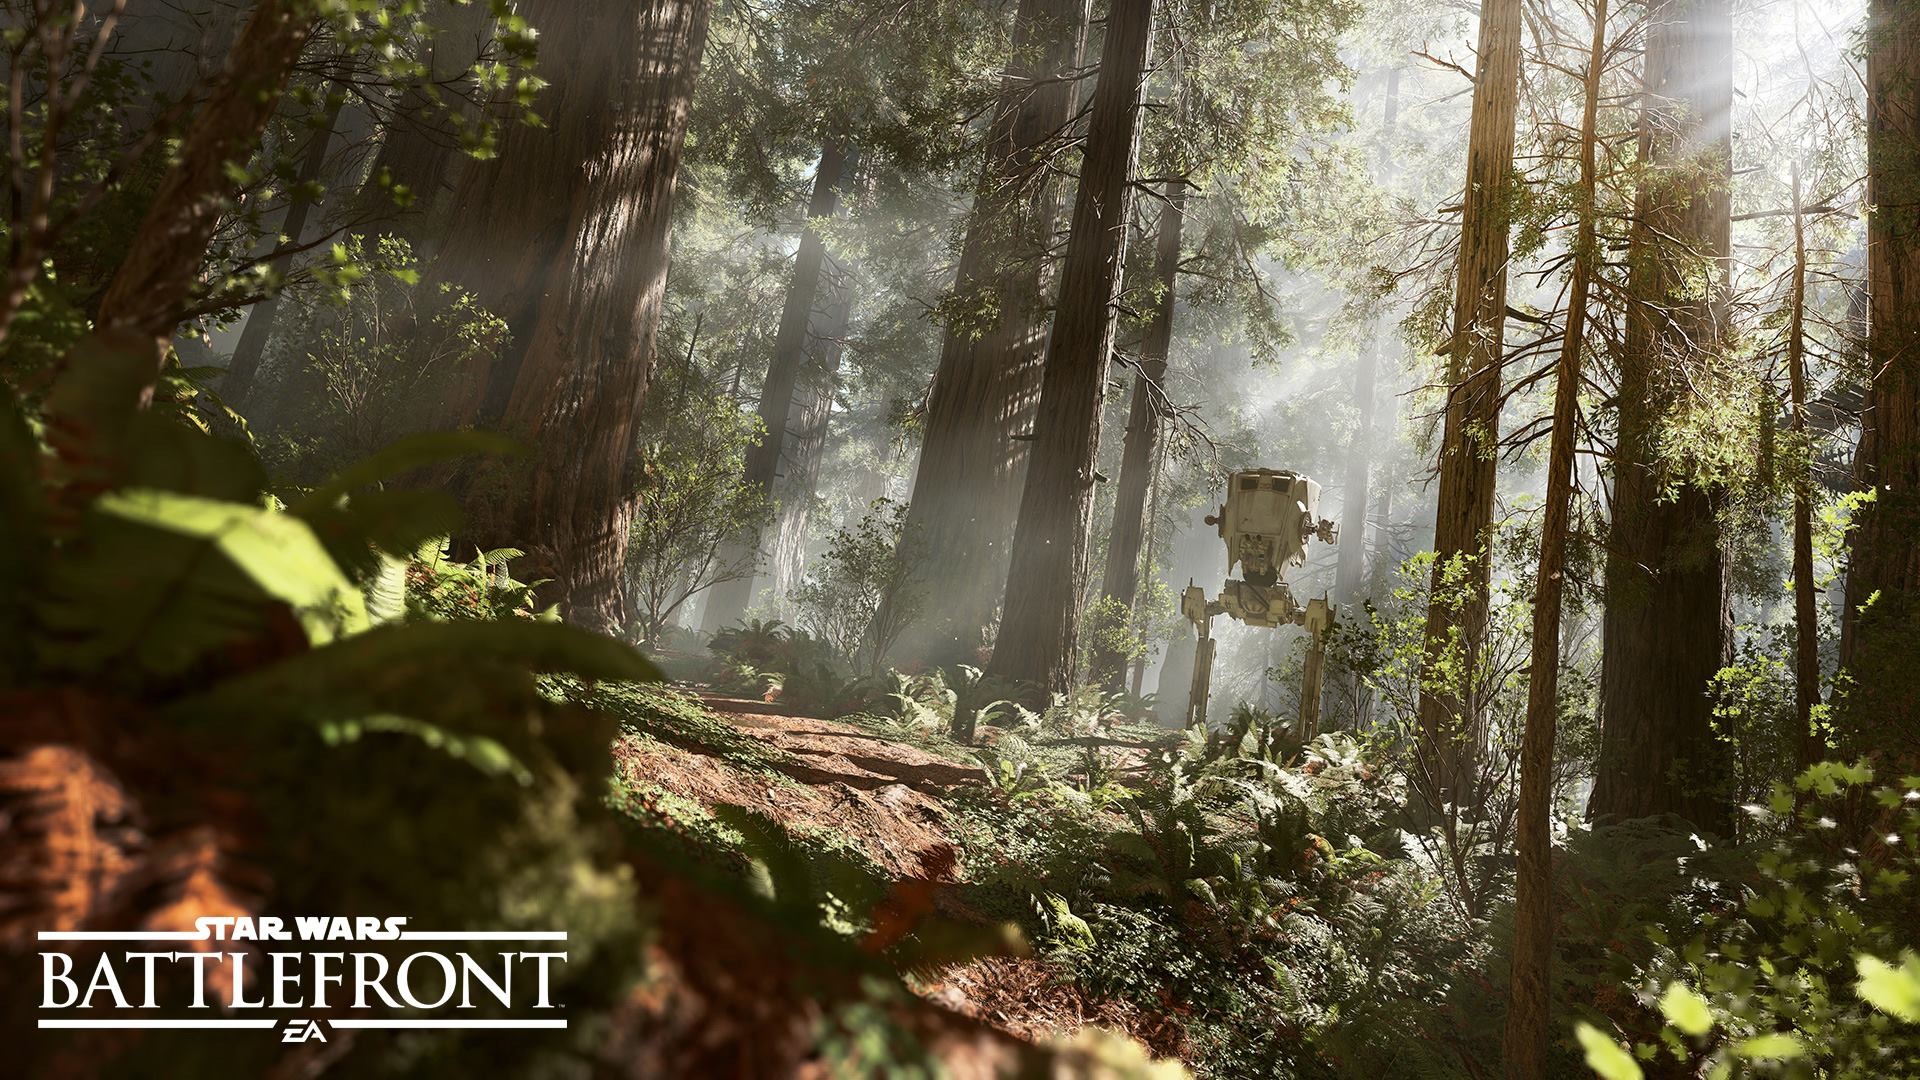 1920x1080 to make Star Wars Battlefront look as visually authentic as possible .